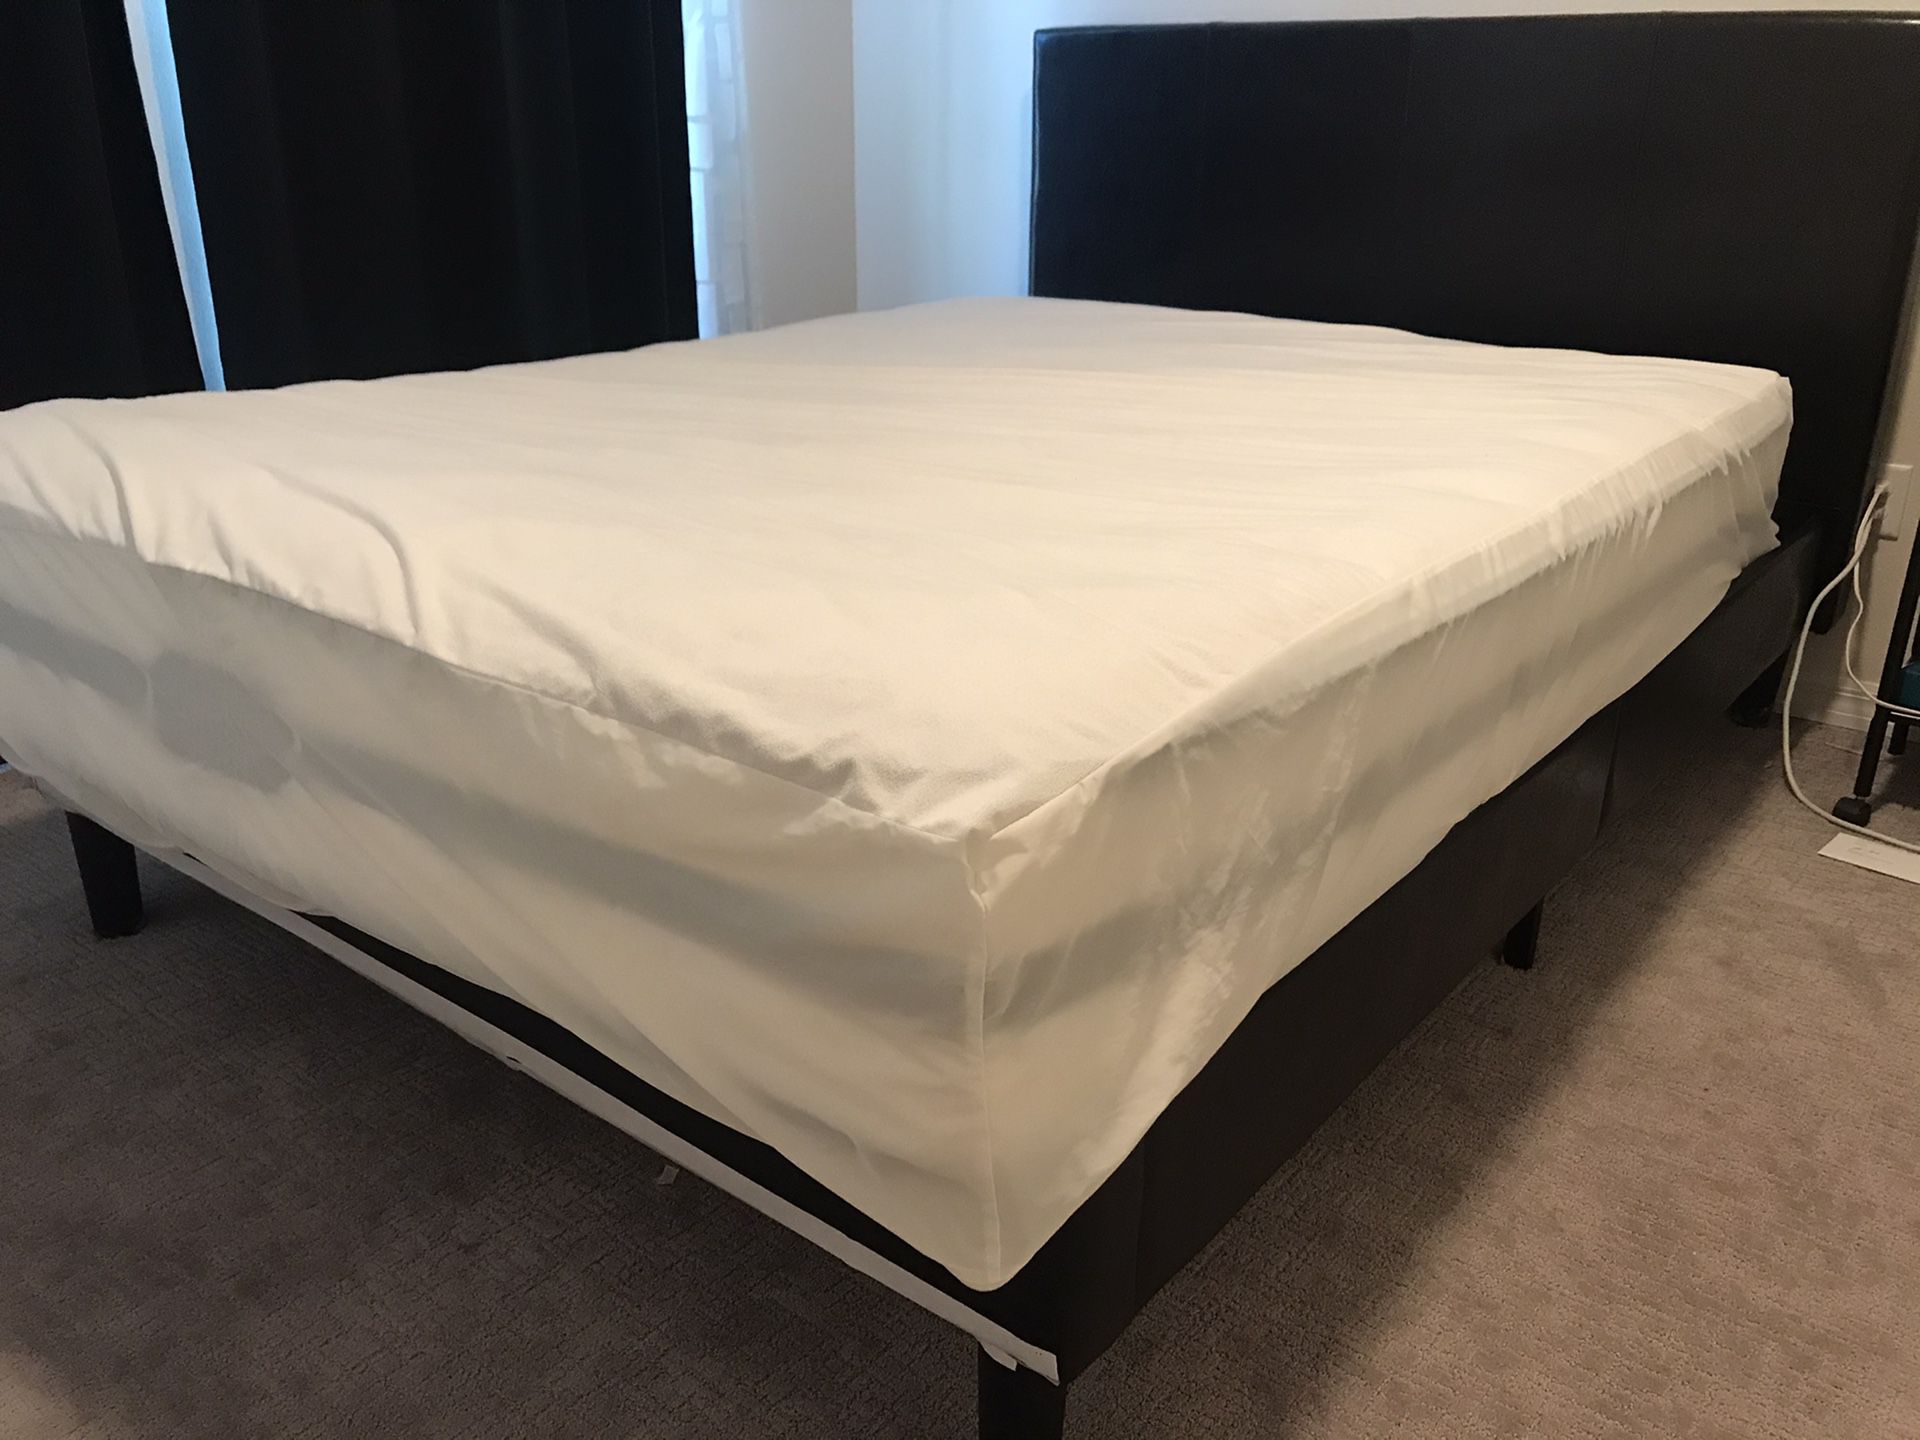 Moving sell— Queen size bed frame and Simmons beauty rest mattress